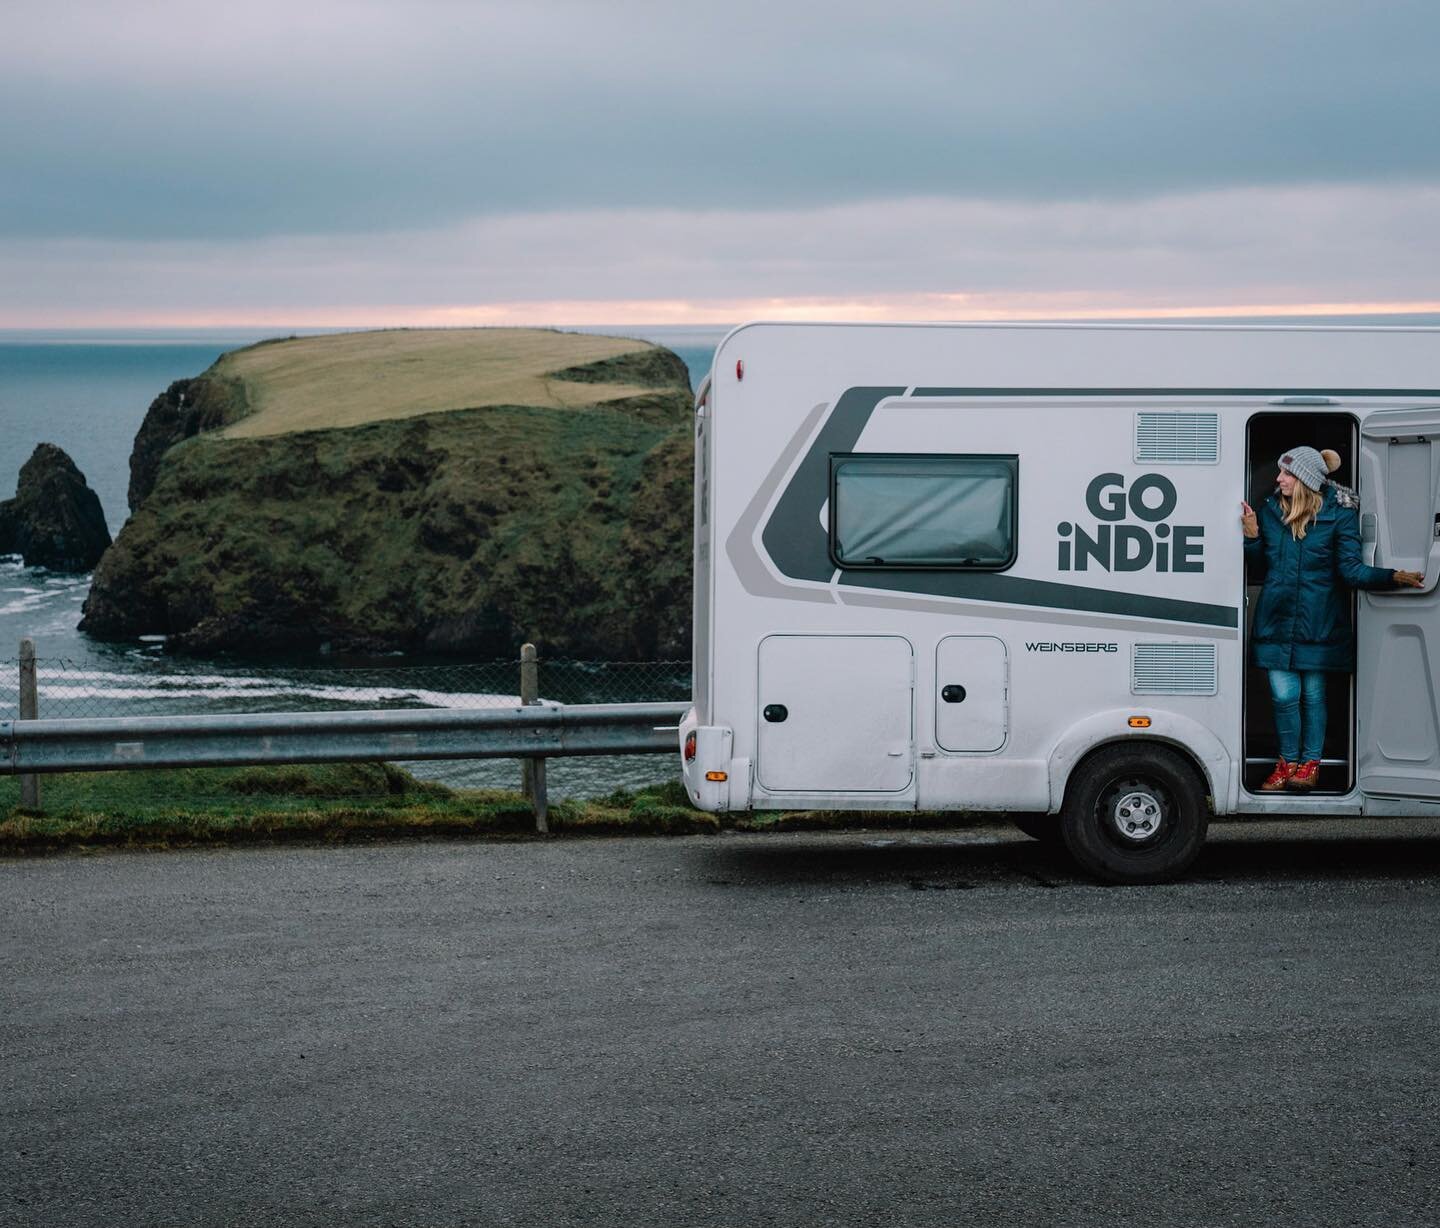 Traveling around a foreign country by campervan during the holidays? YES, I highly recommend it!! It&rsquo;s hard to believe that this time last year we were off exploring Ireland&rsquo;s Wild Atlantic Way and taking in all of the Holiday vibes along